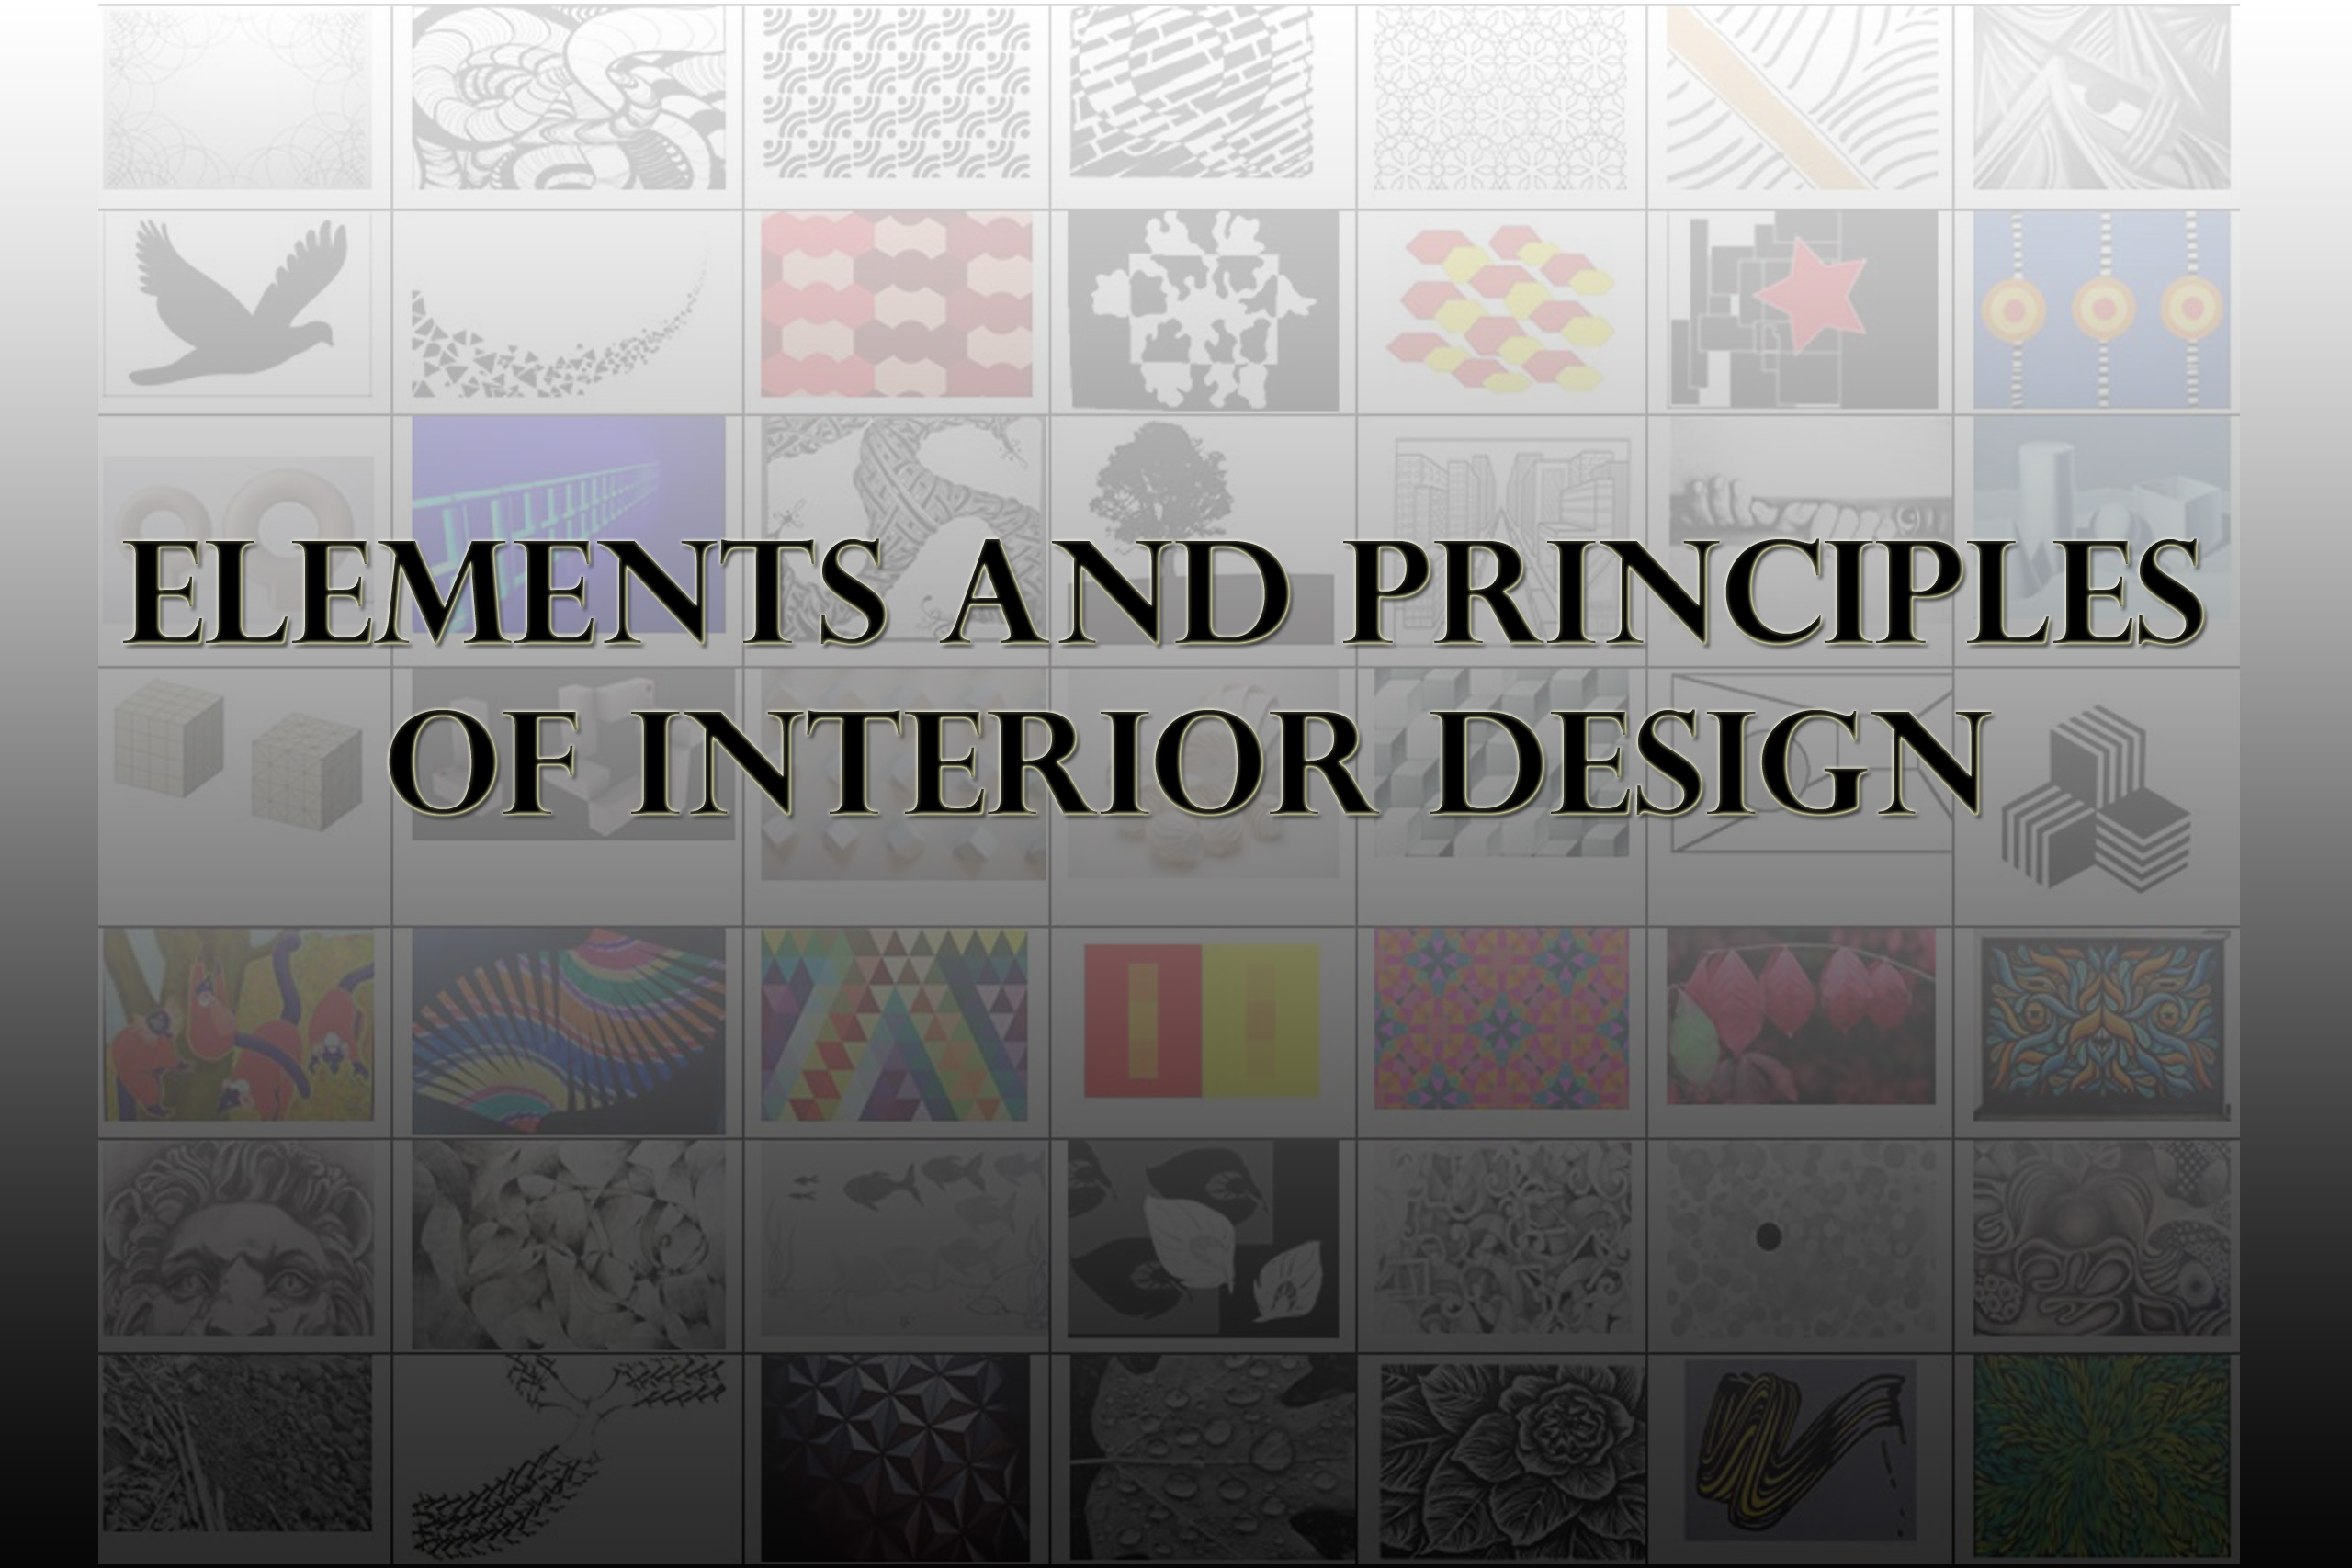 Elements and Principles of Interior Design